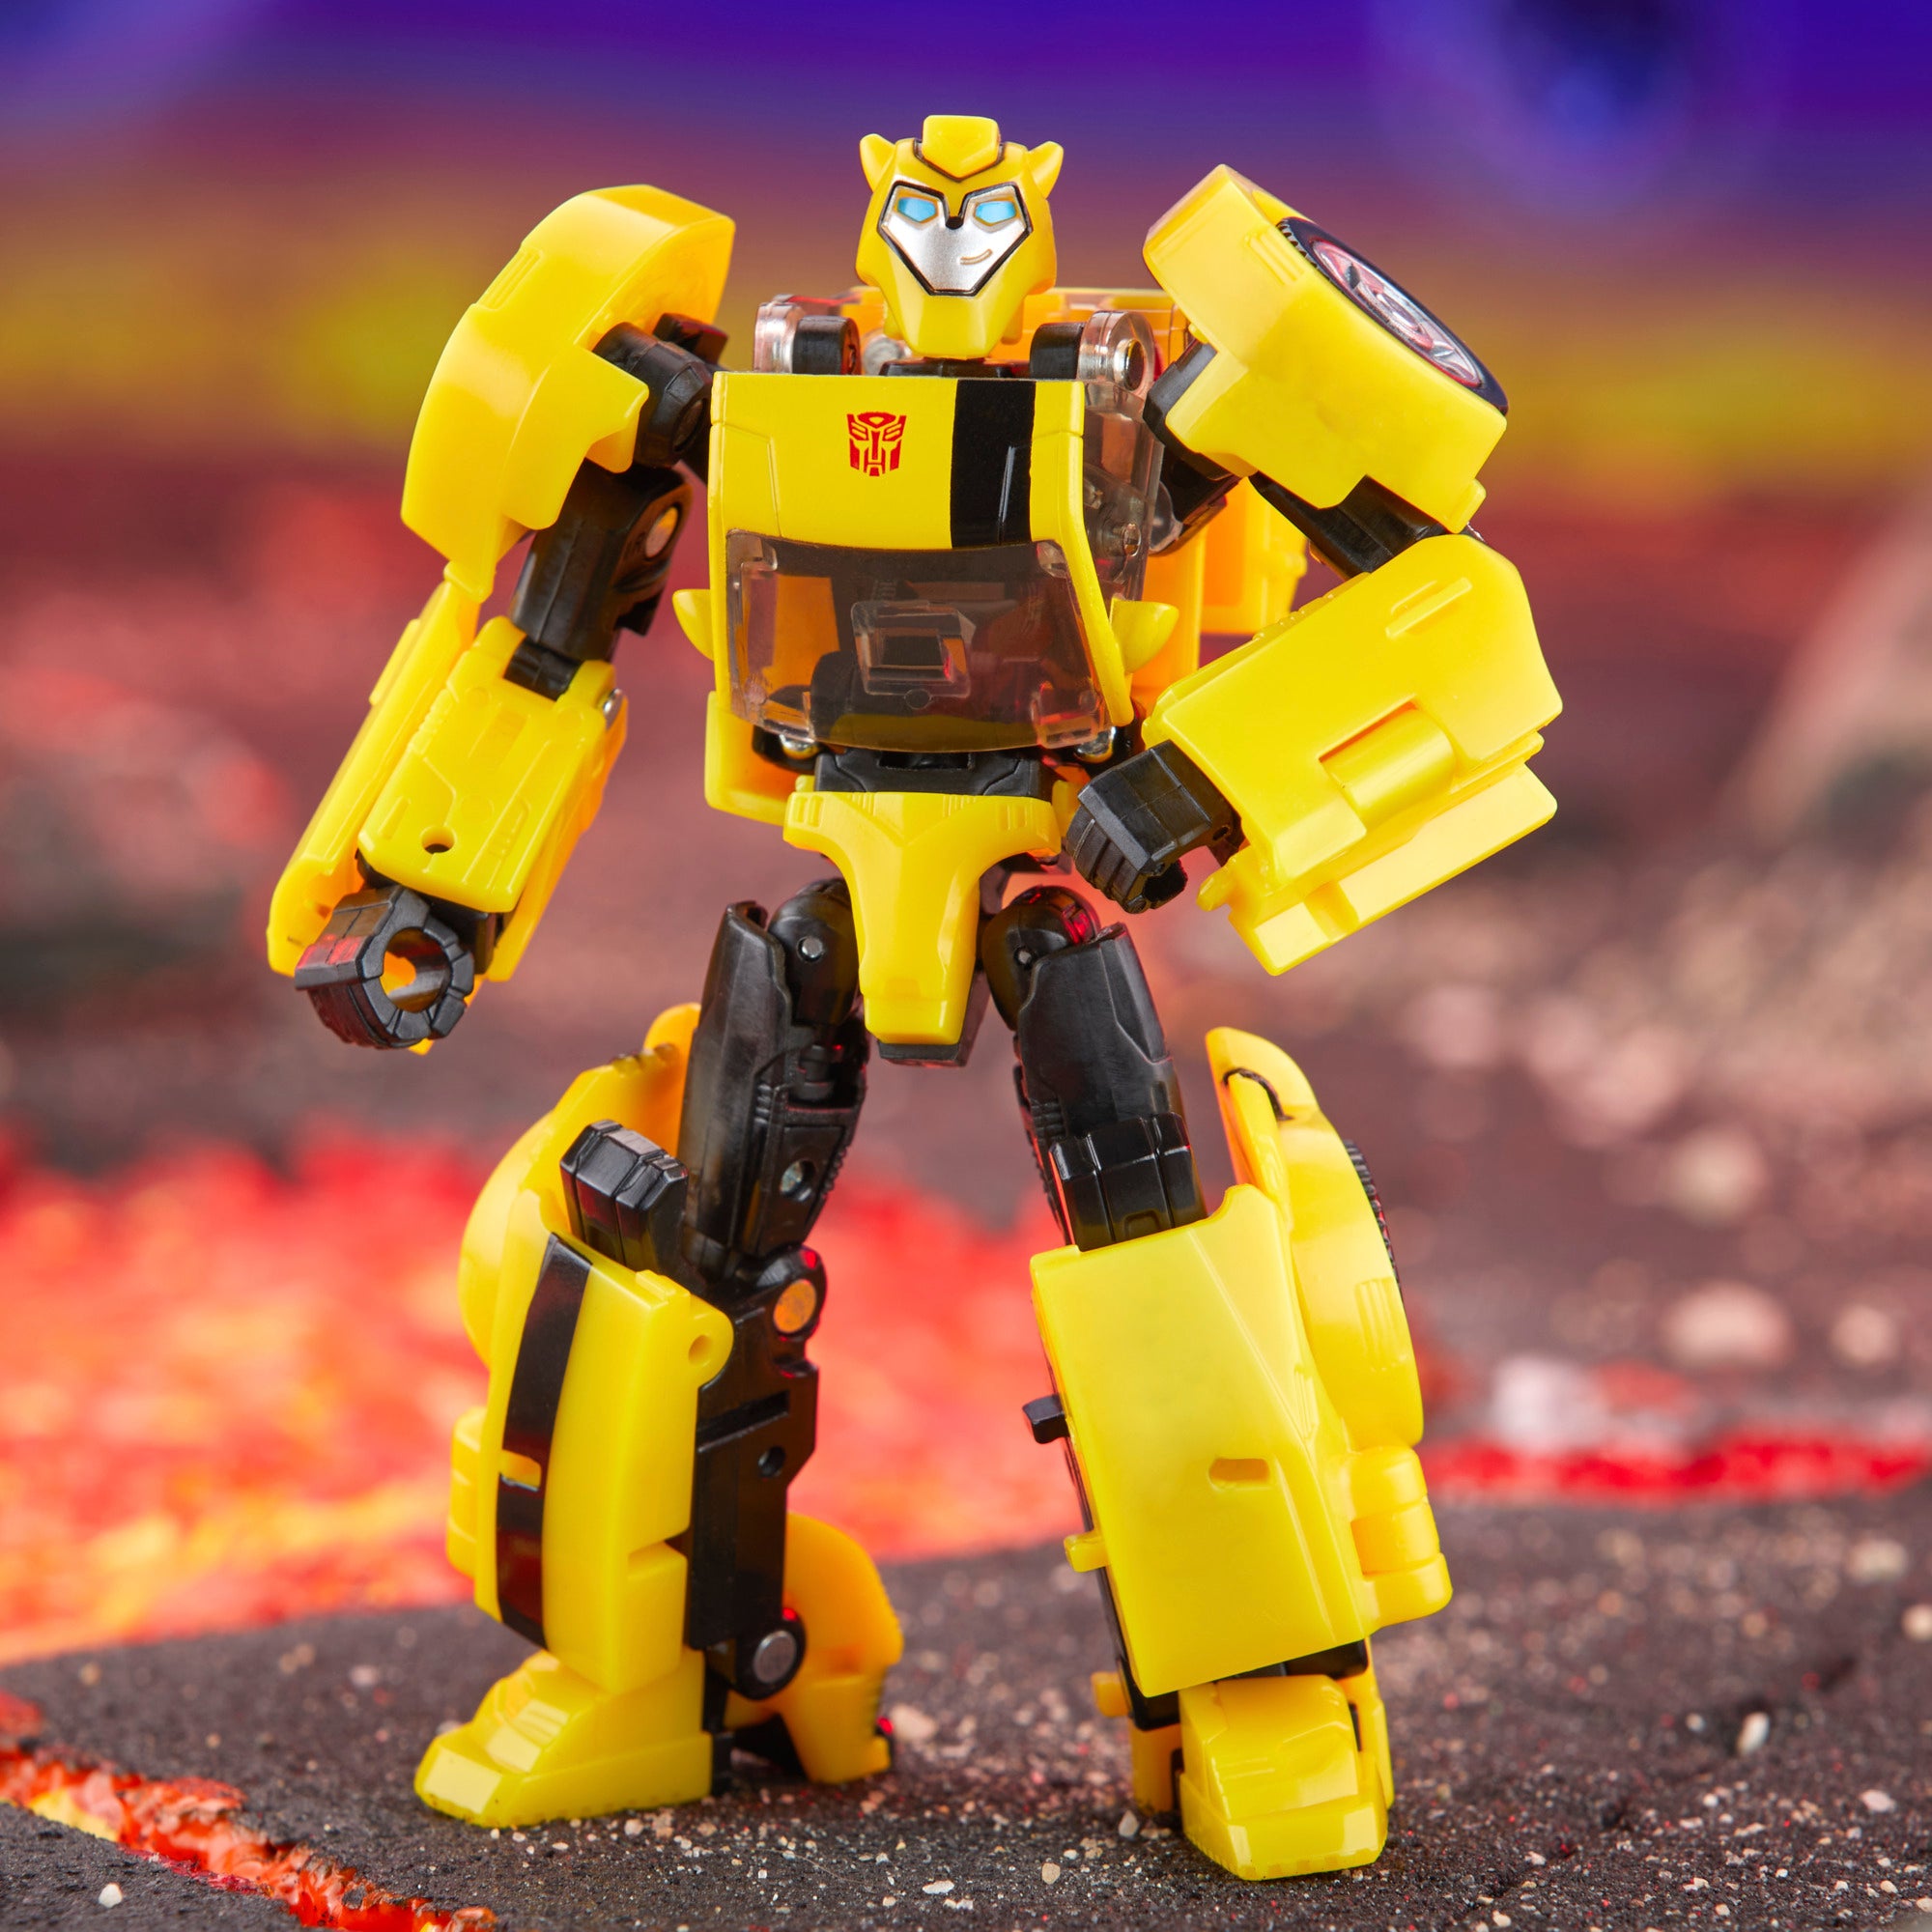 Transformers Ultimate Bumble Bee - UK Suppliers